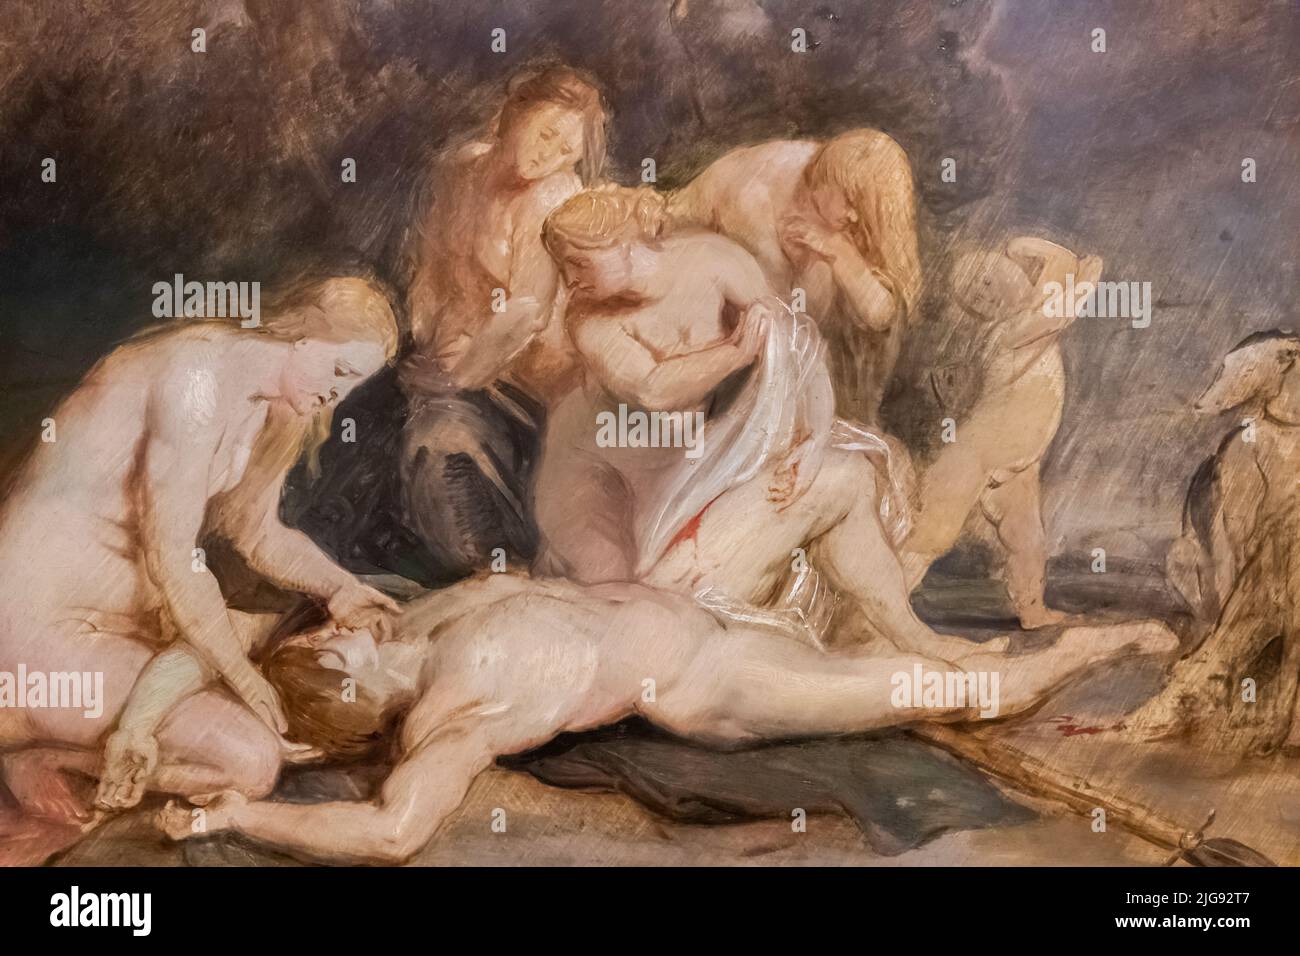 Painting titled 'Venus Mourning Adonis' by Peter Paul Rubens dated 1604 Stock Photo